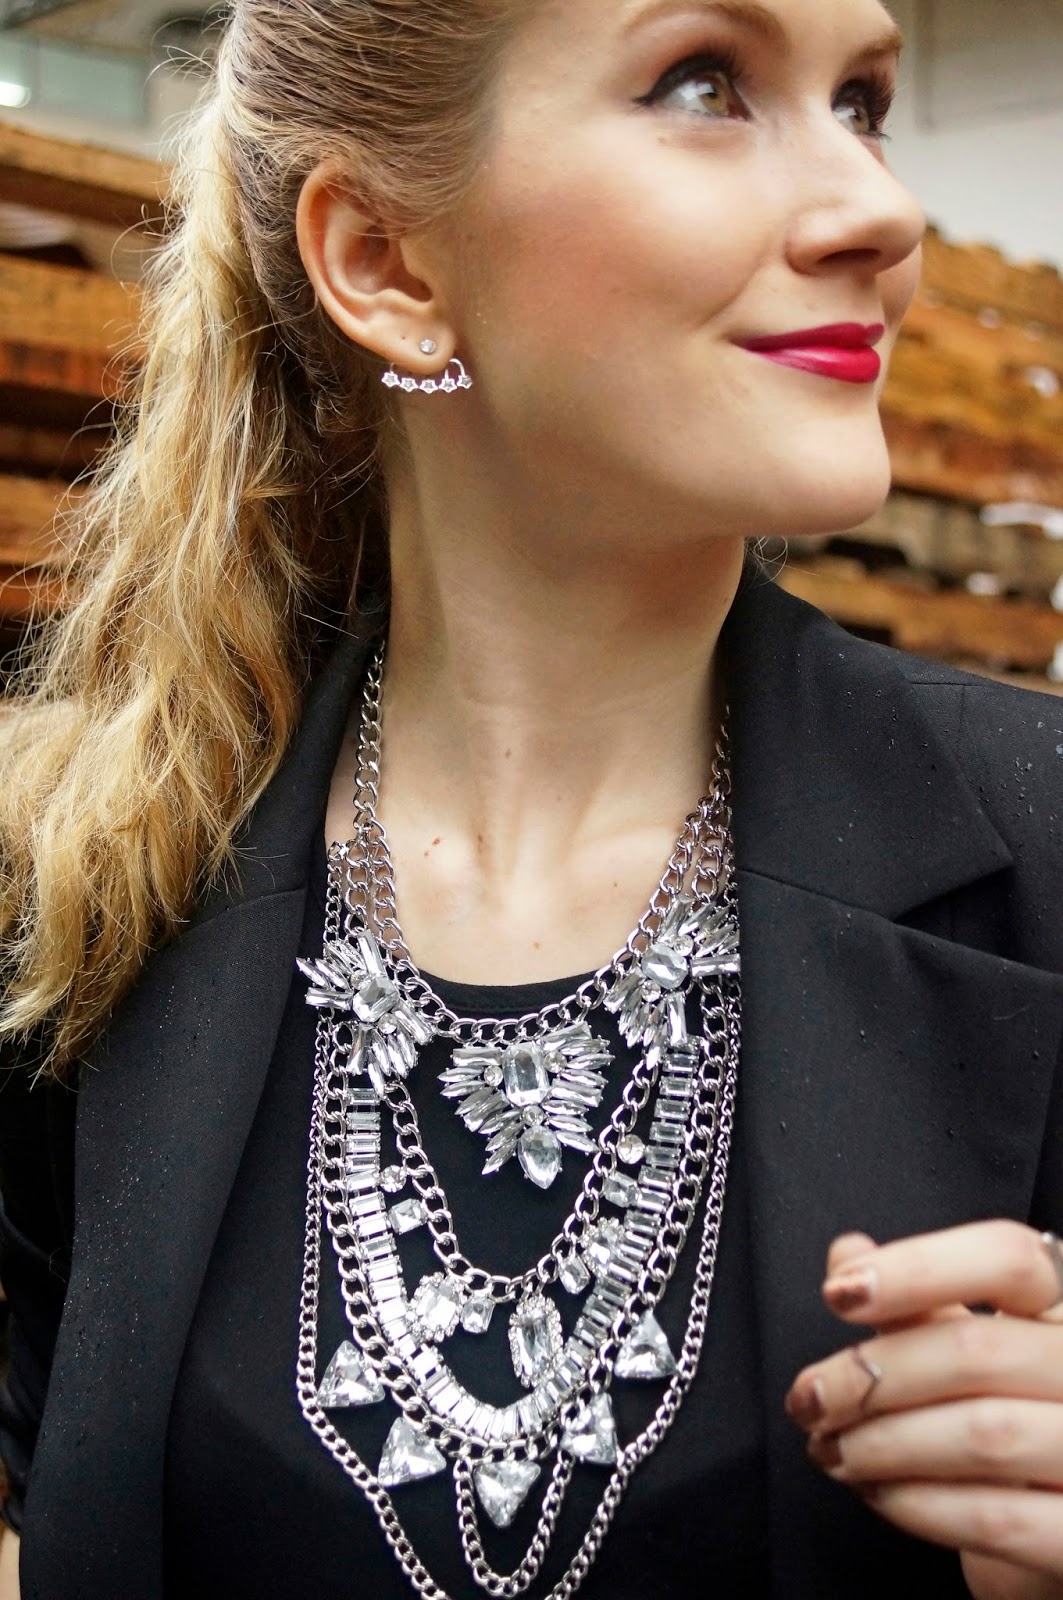 This statement necklace from Happiness Boutique is the perfect touch of glam!